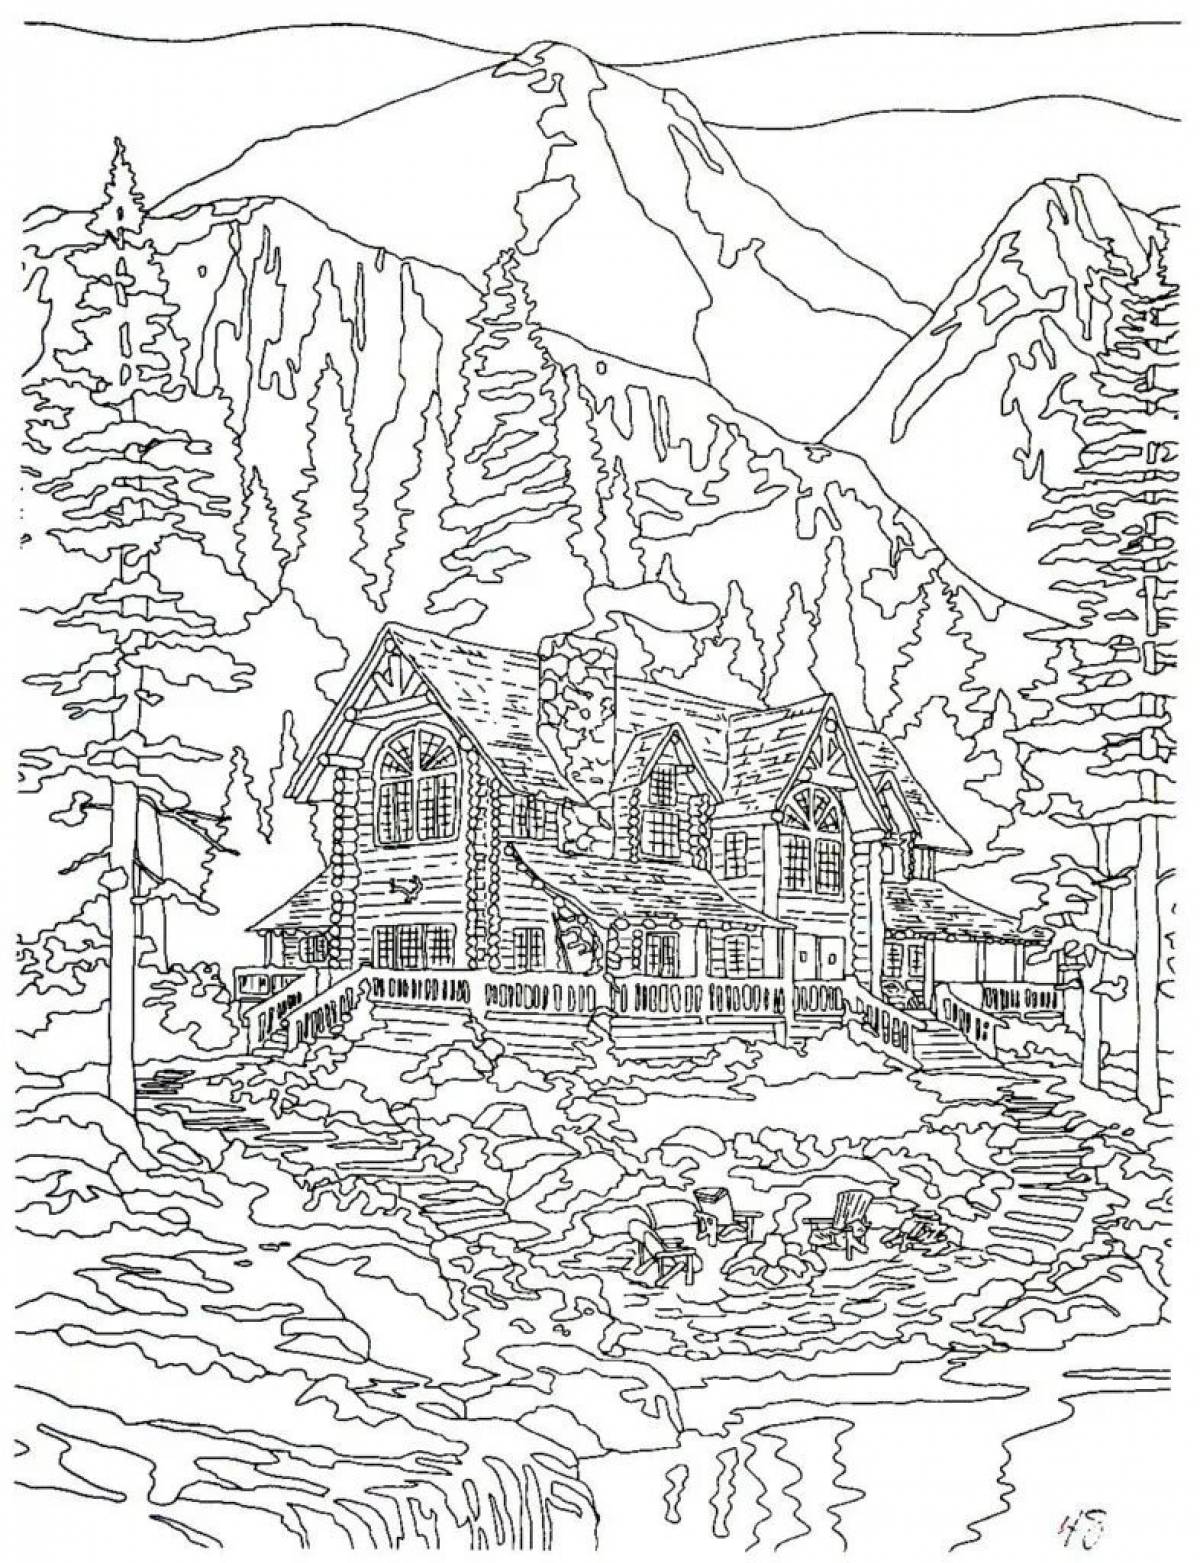 Colorful house for adults coloring book